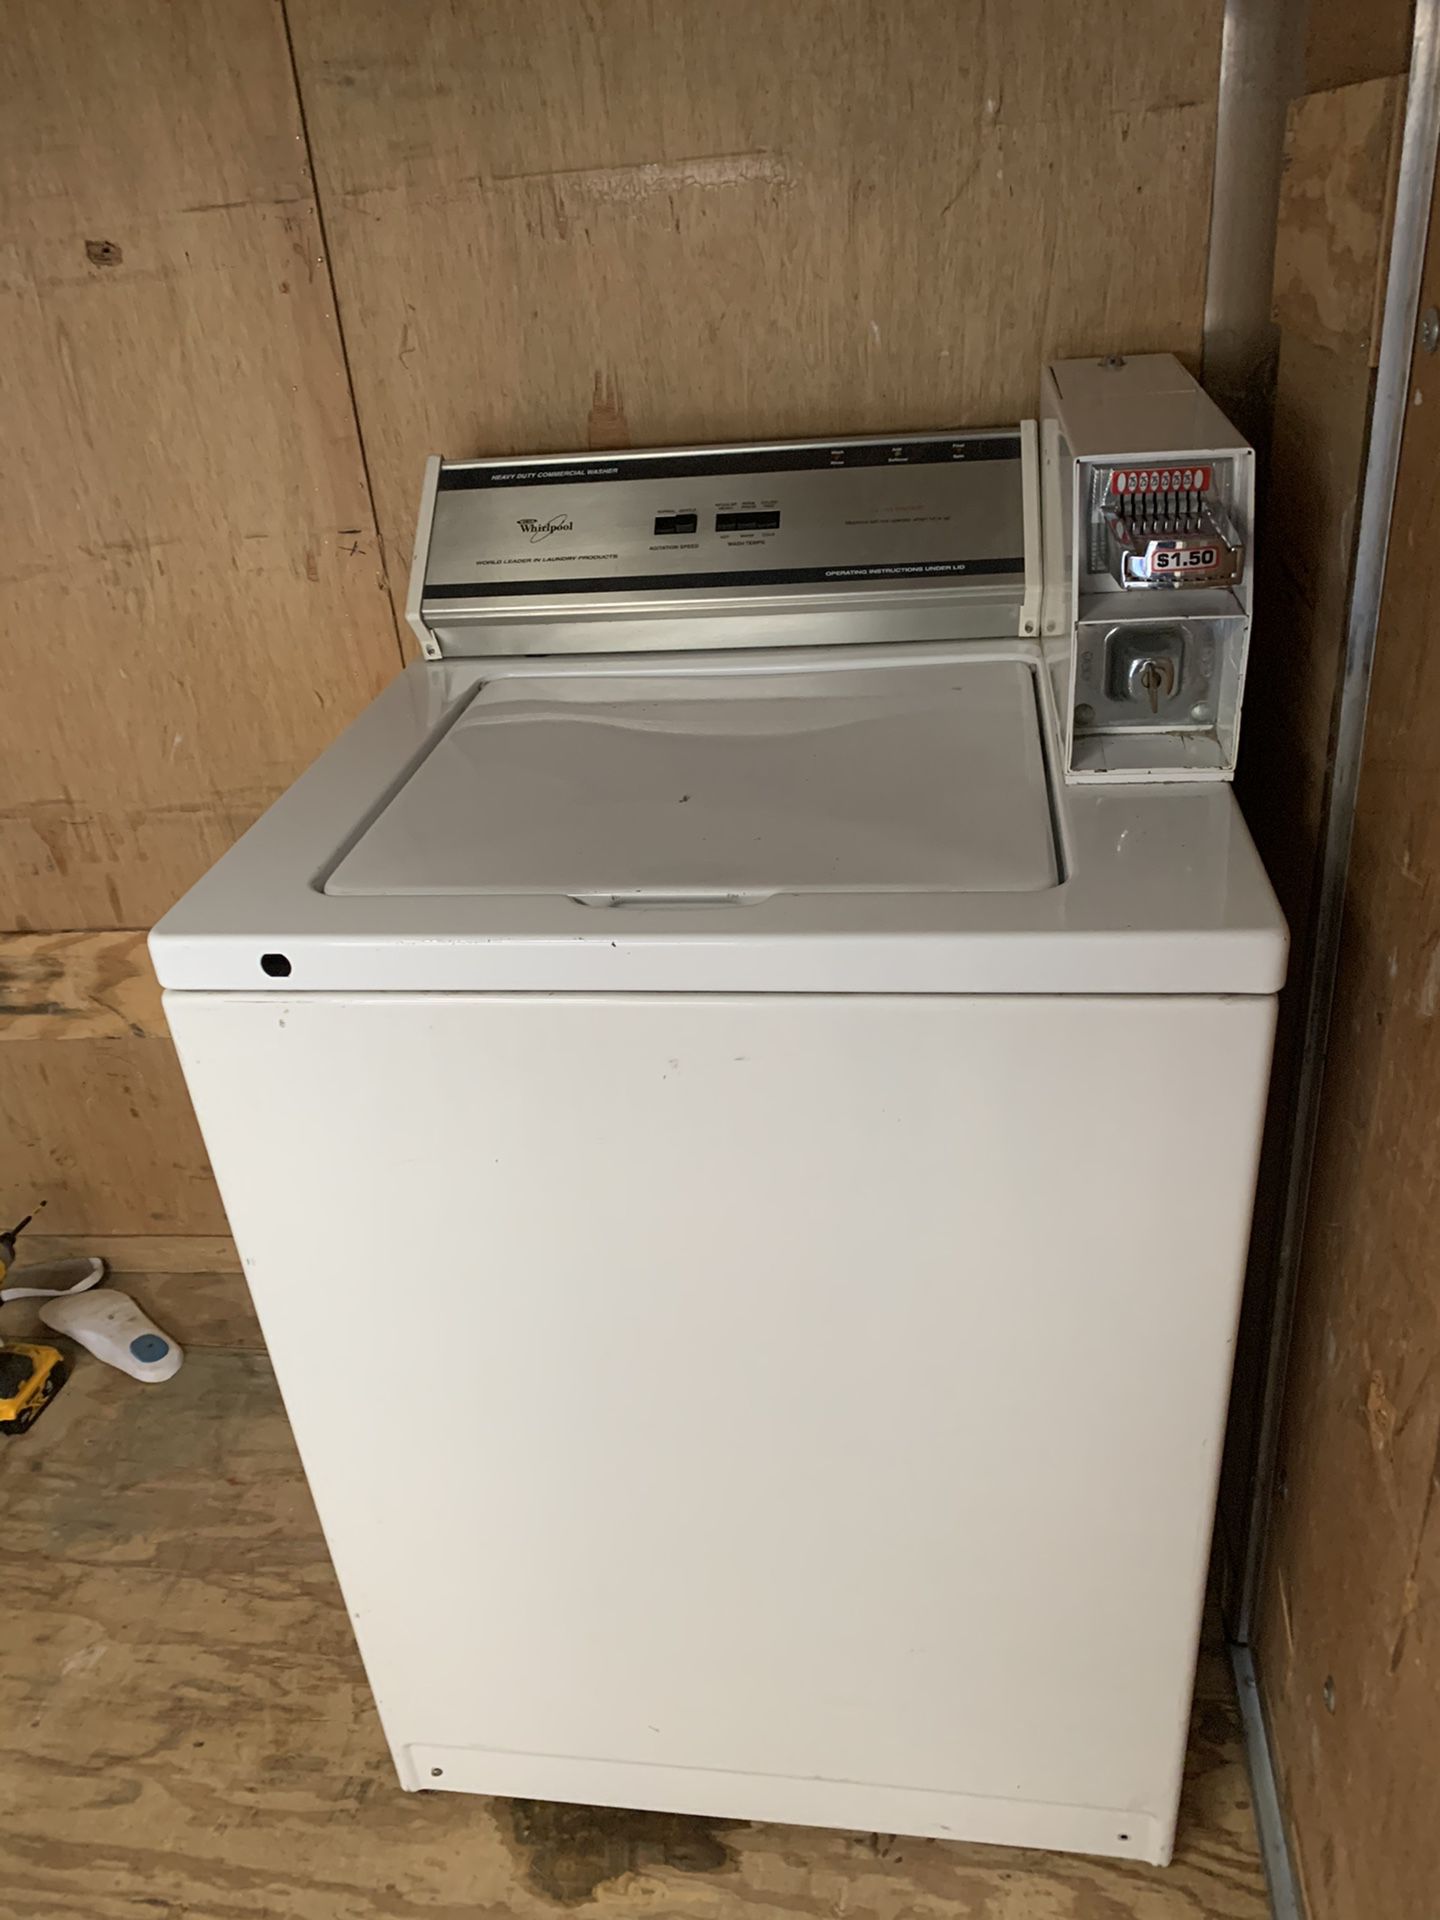 Whirlpool commercial coin operated washer